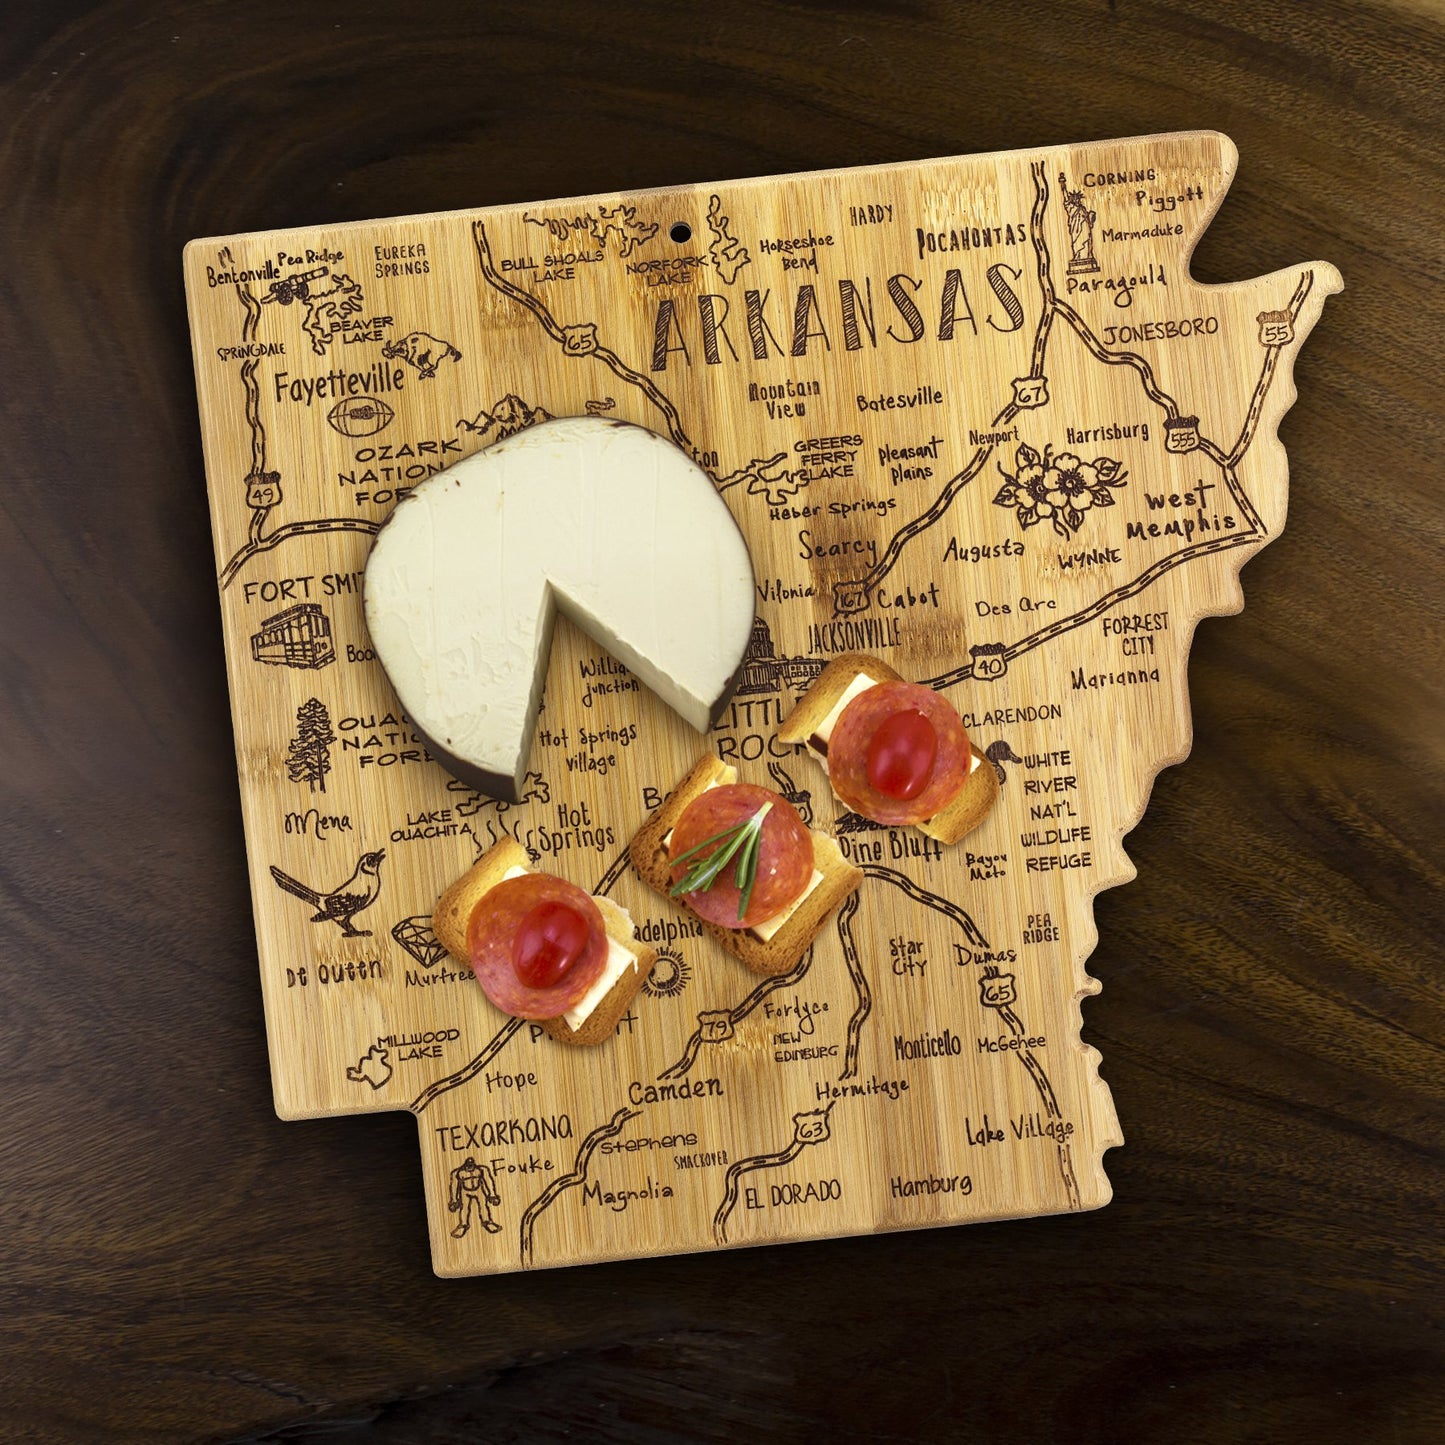 Arkansas shaped board with cheese and appetizers on it.